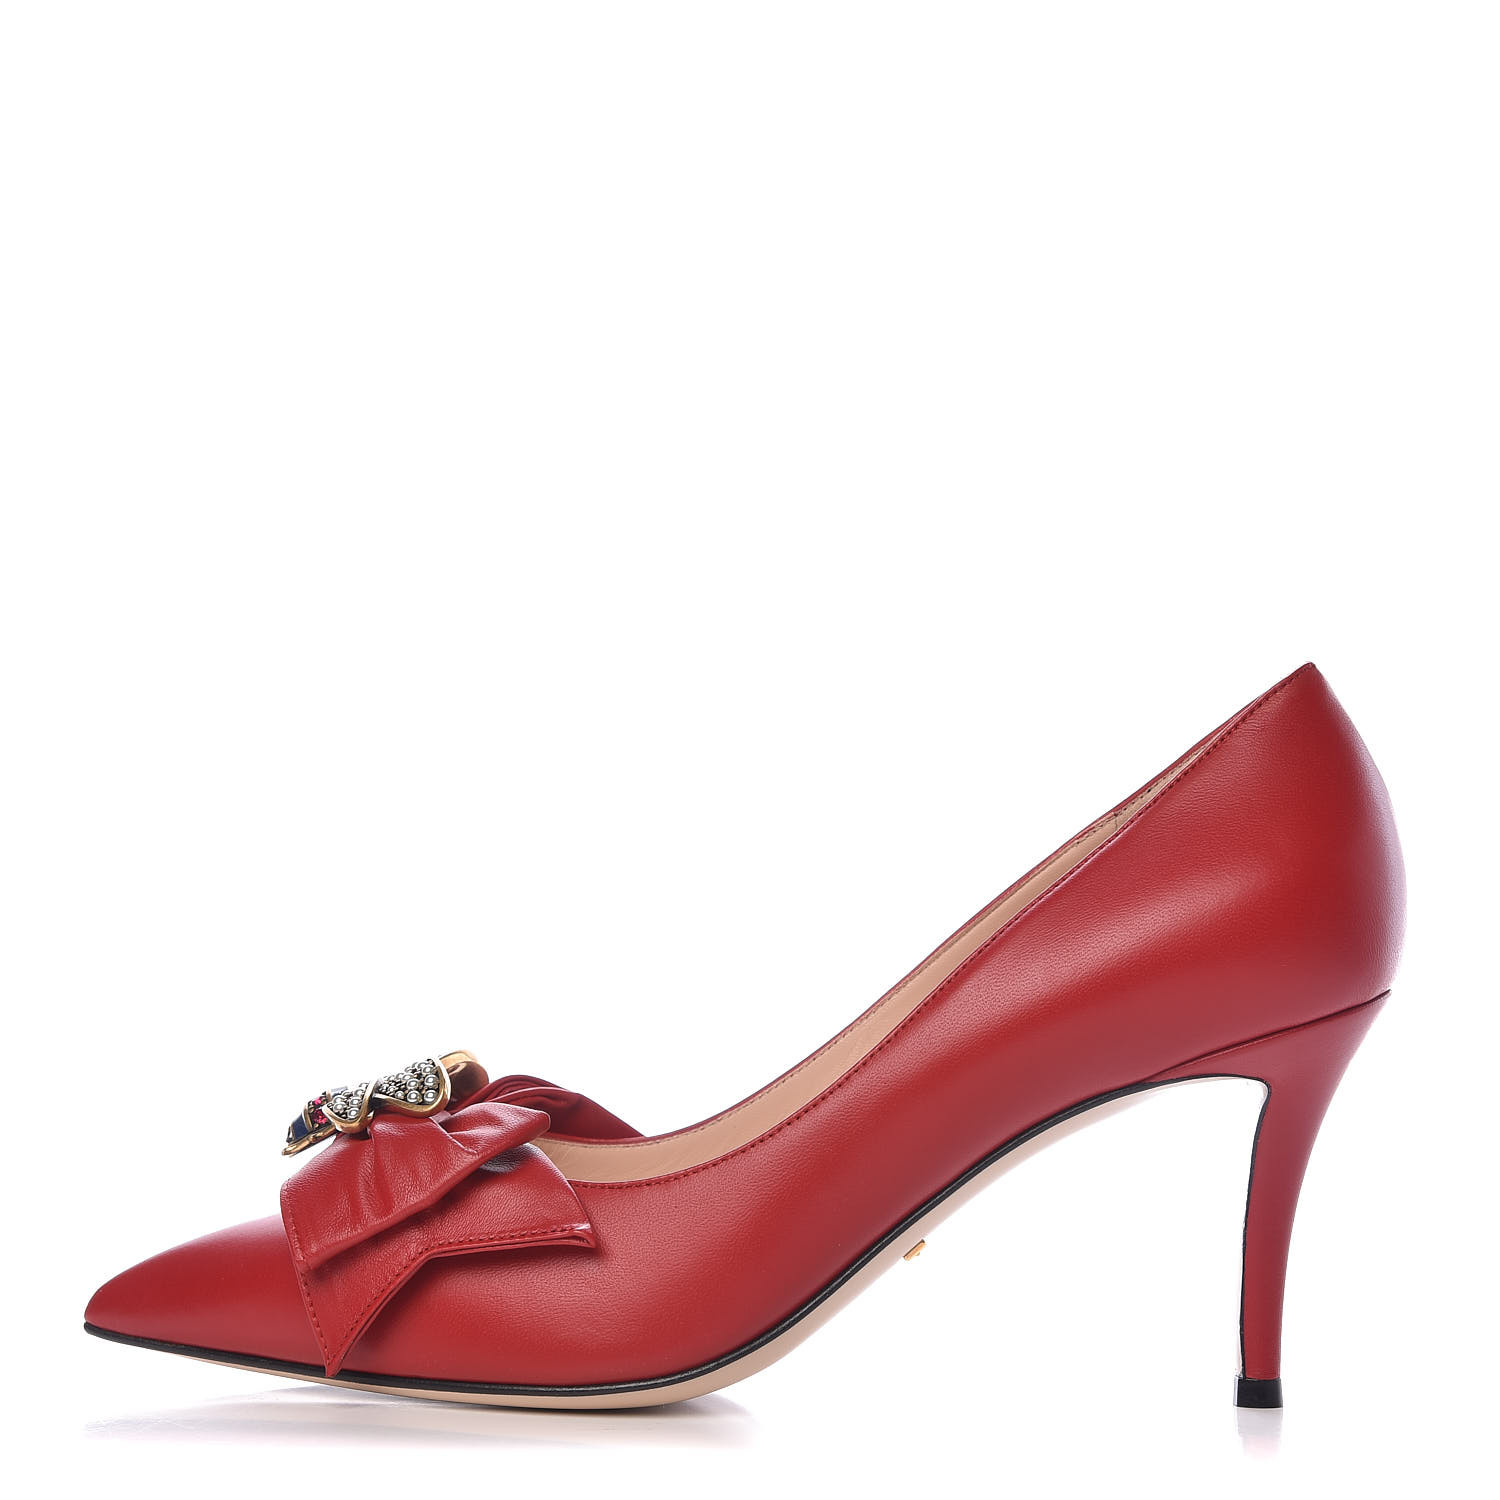 Aske tårn lemmer GUCCI Nappa Queen Margaret Bow Mid Heel Pumps 40 Hibiscus Red 459540 |  FASHIONPHILE